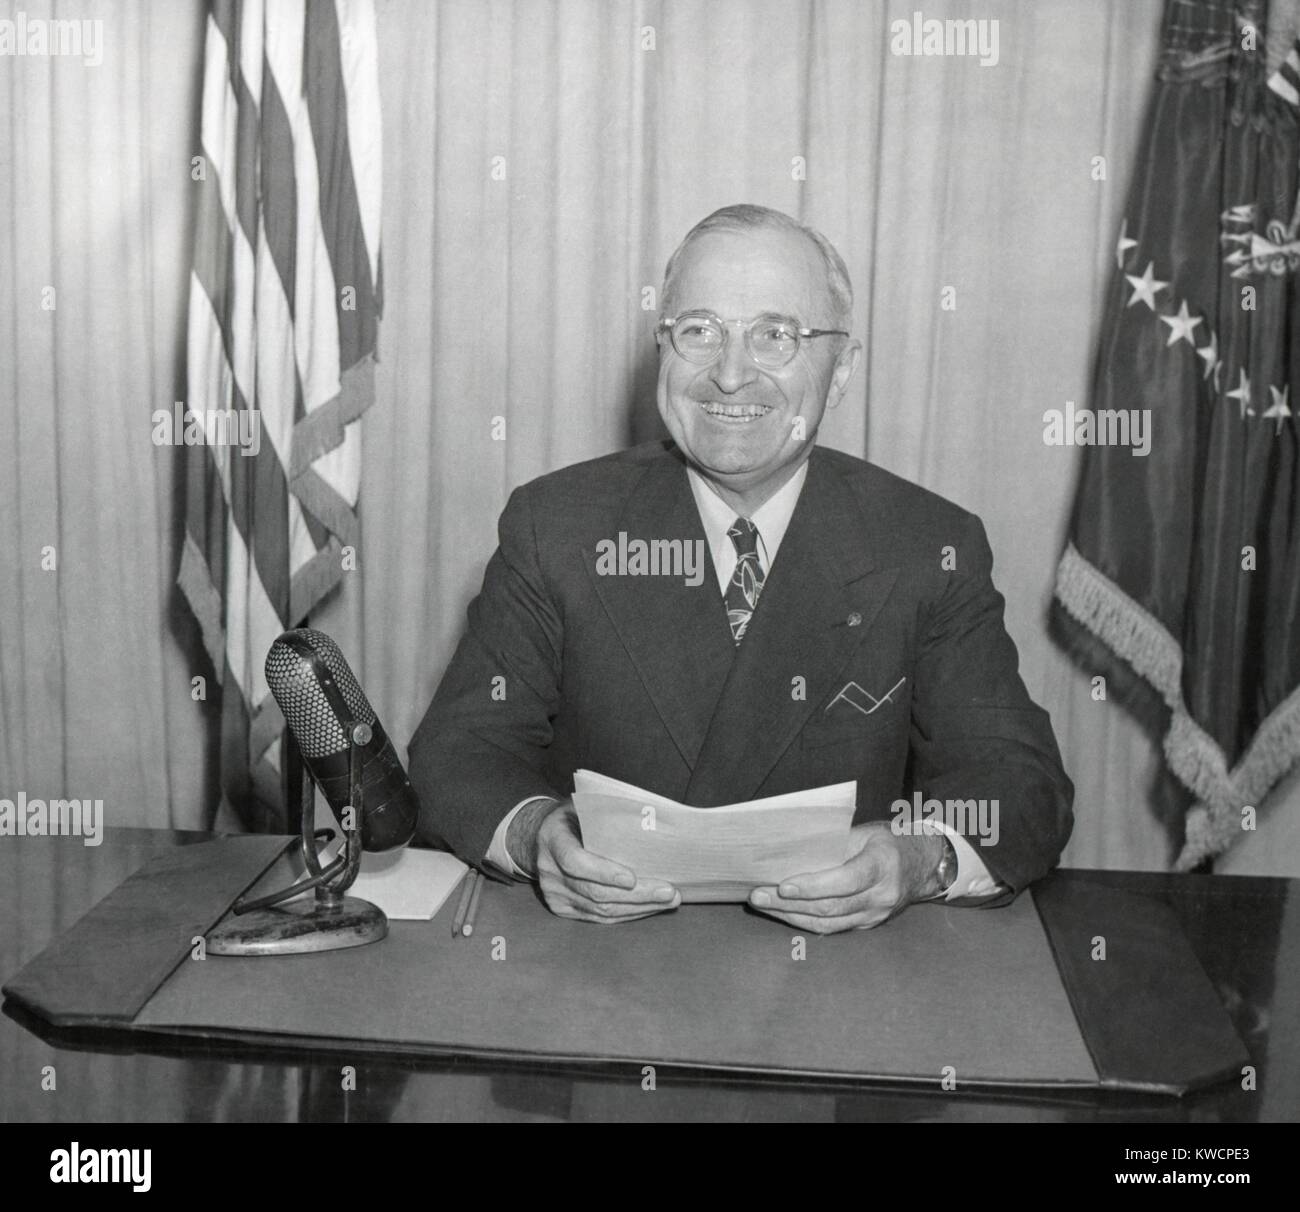 President Harry Truman delivering a radio speech on Jan. 2, 1946. He addressed the program for the return to peacetime economy. - (BSLOC 2014 15 9) Stock Photo